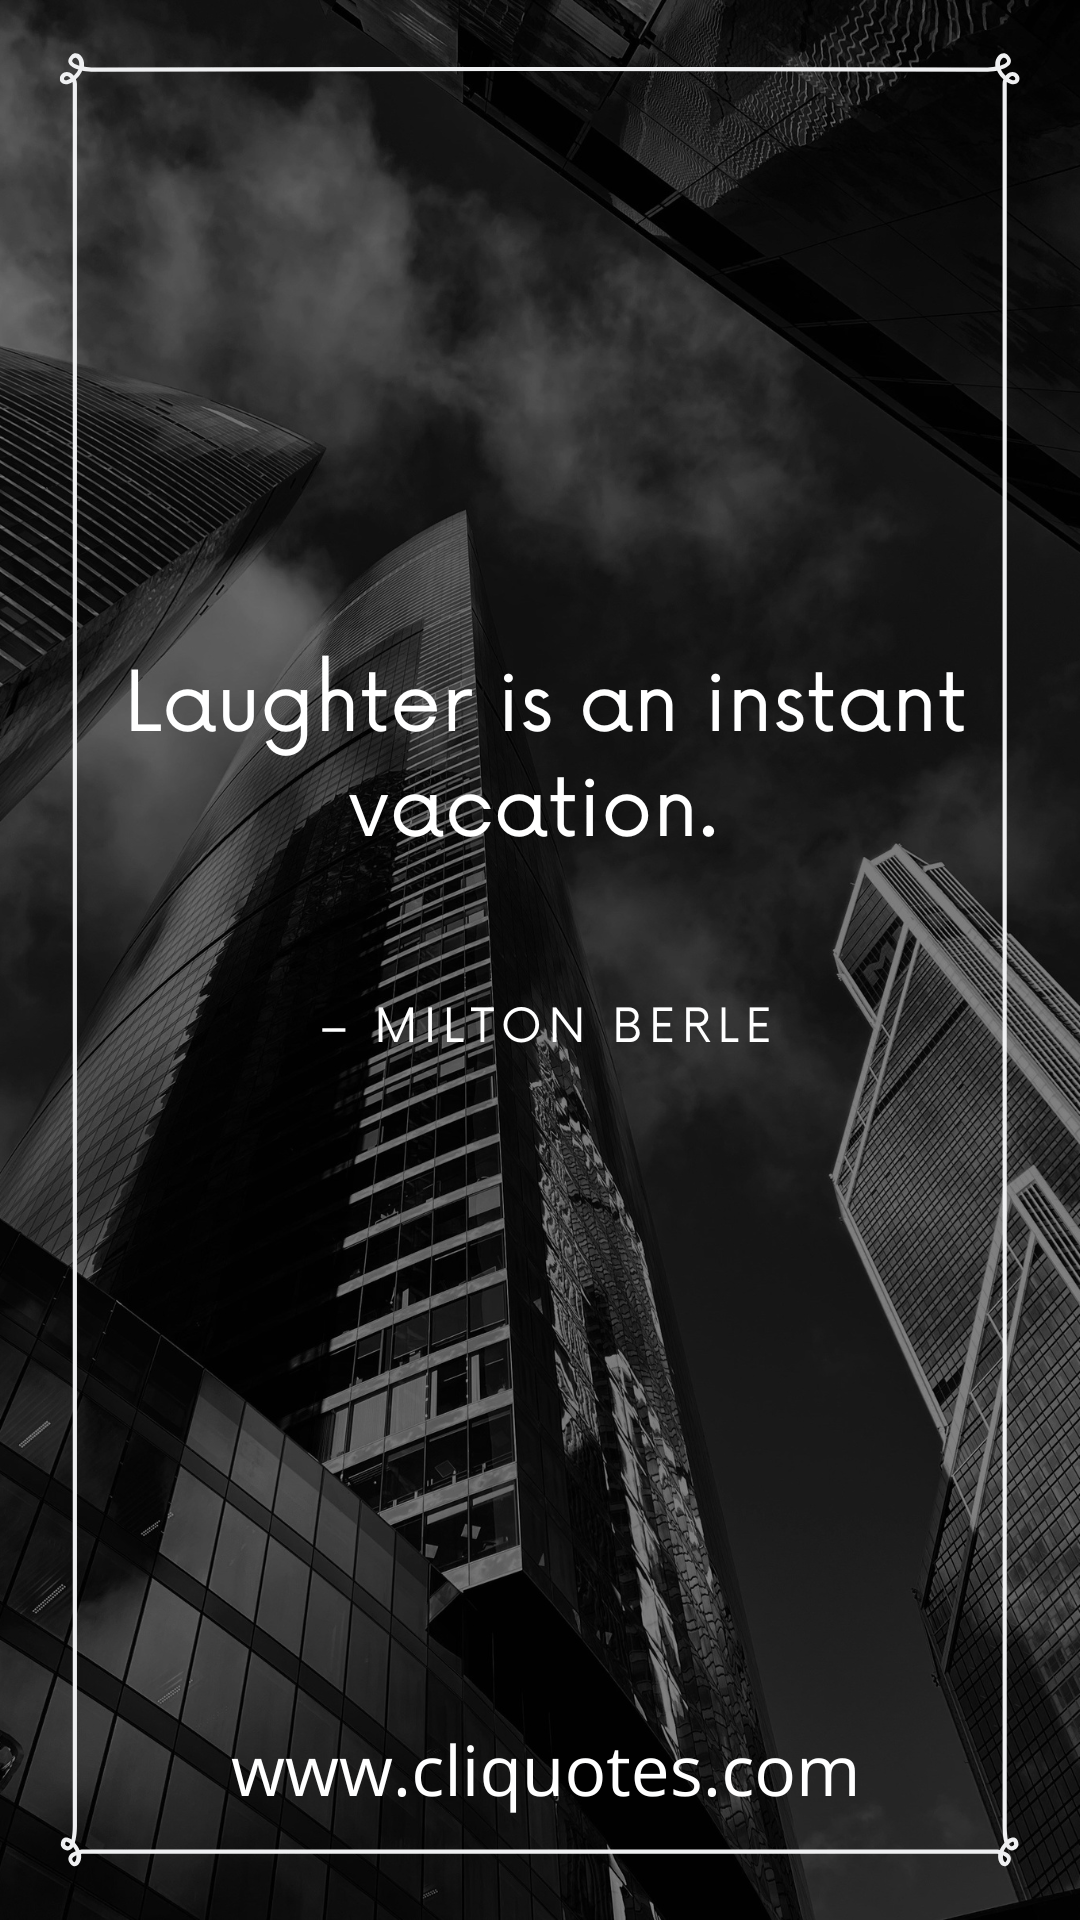 Laughter is an instant vacation. – Milton Berle